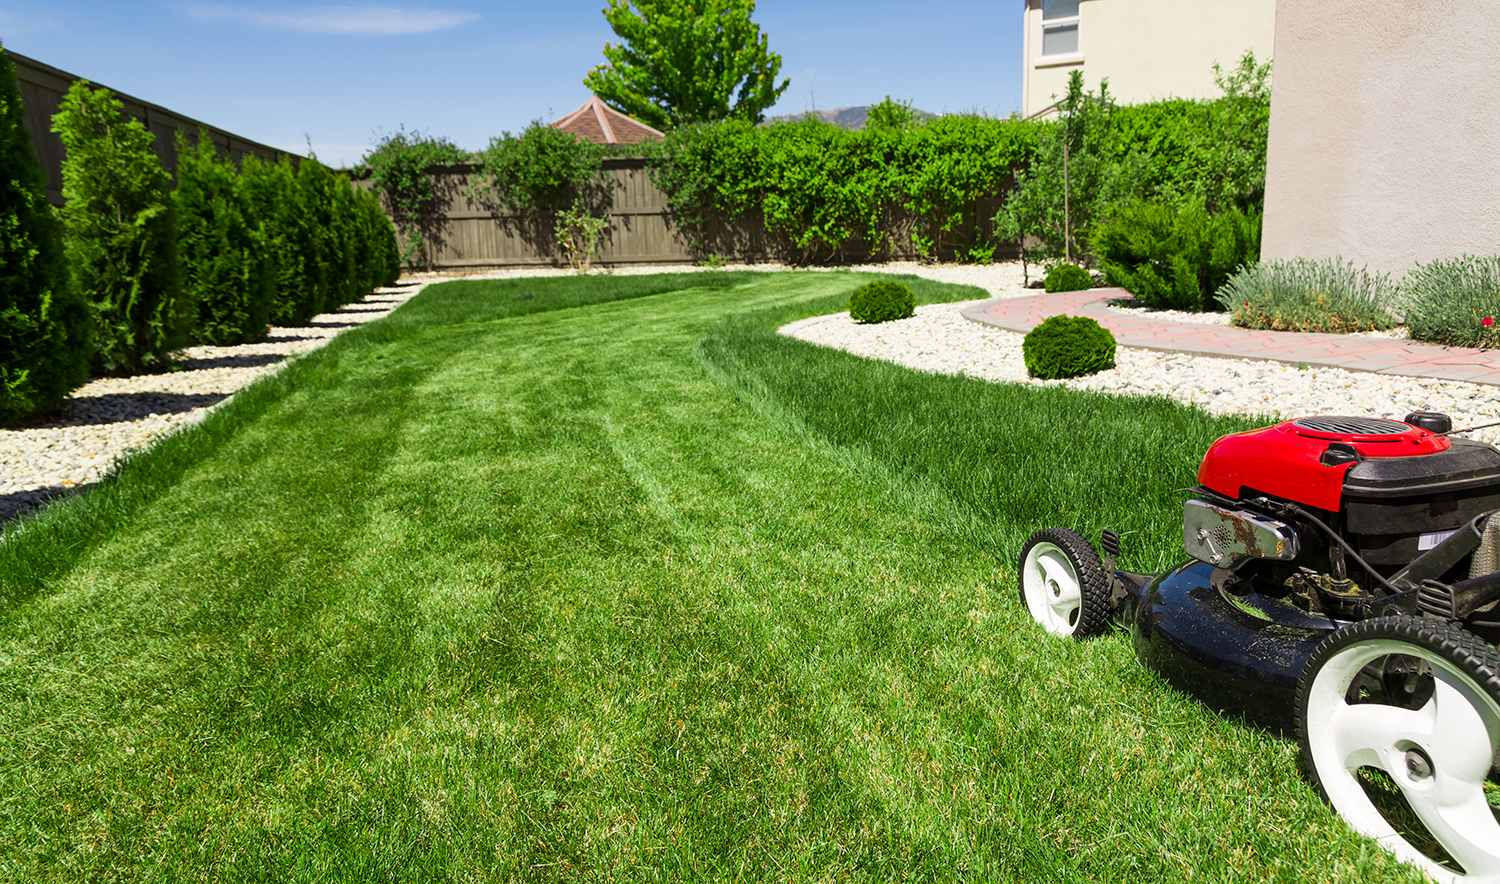 lawn care landscaping weed control